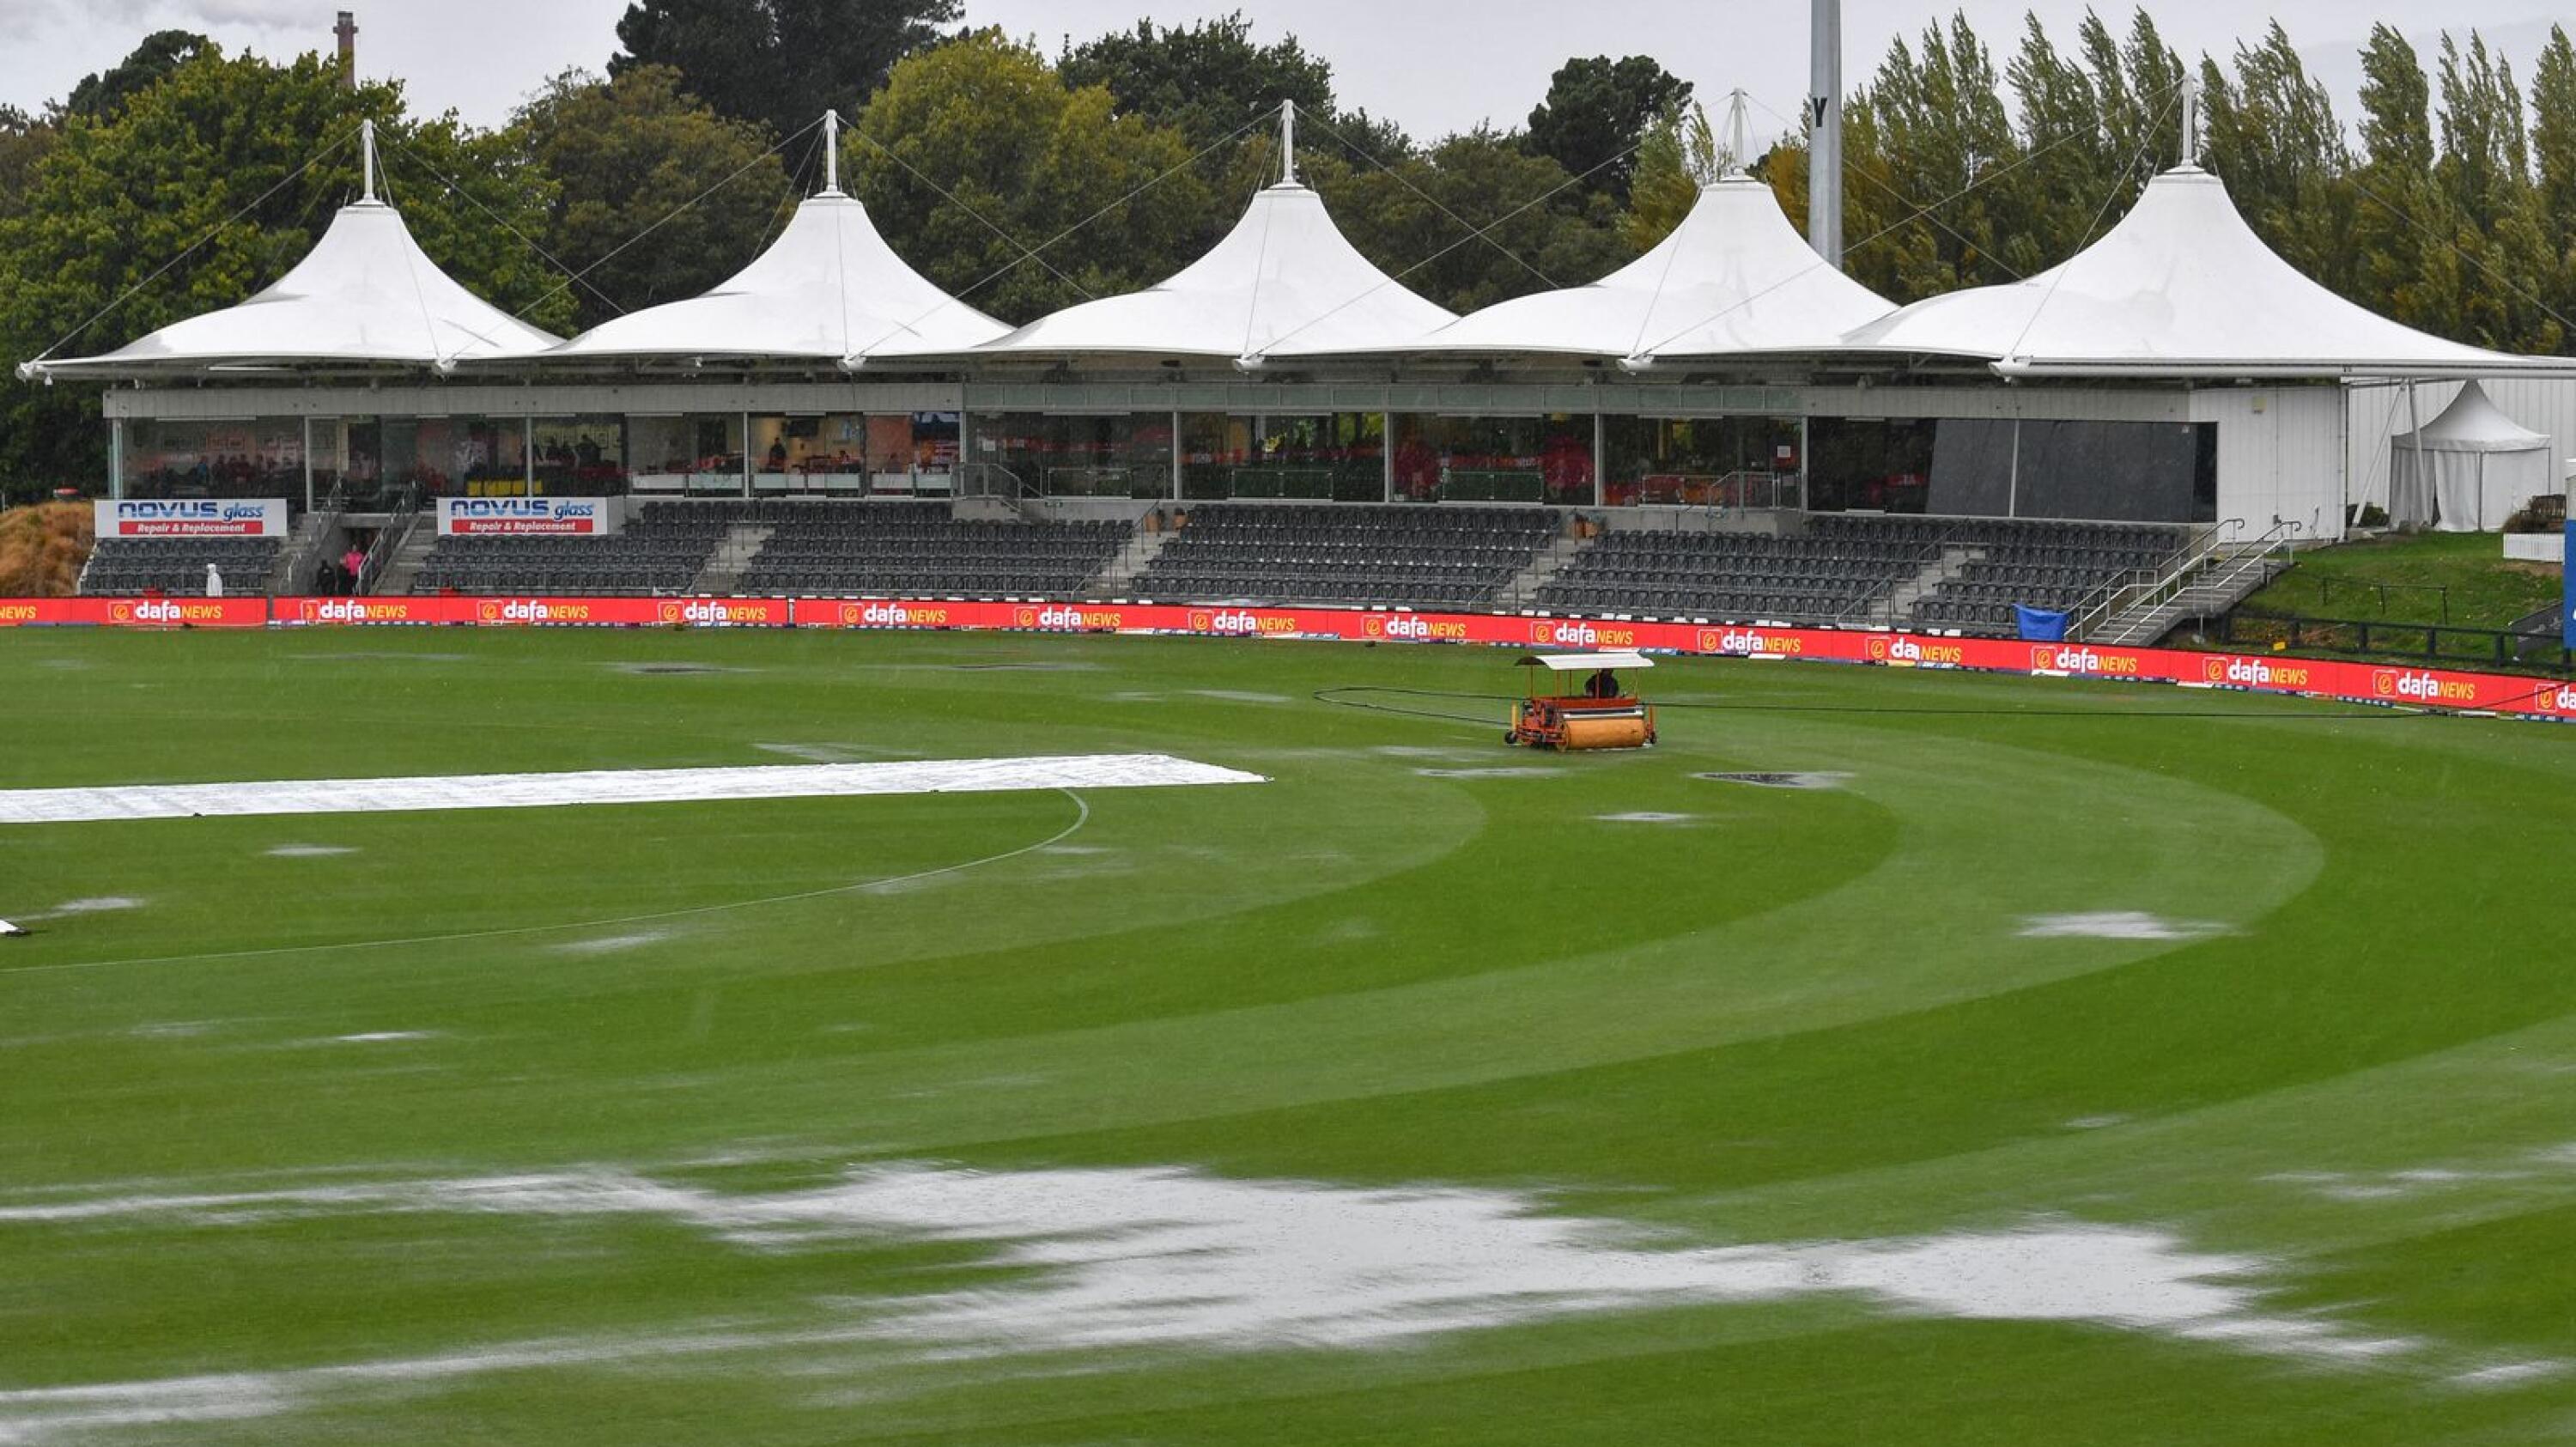 Puddles form on the field as rain falls before the start of the second one-day international cricket match between New Zealand and Sri Lanka at Hagley Oval in Christchurch on Tuesday